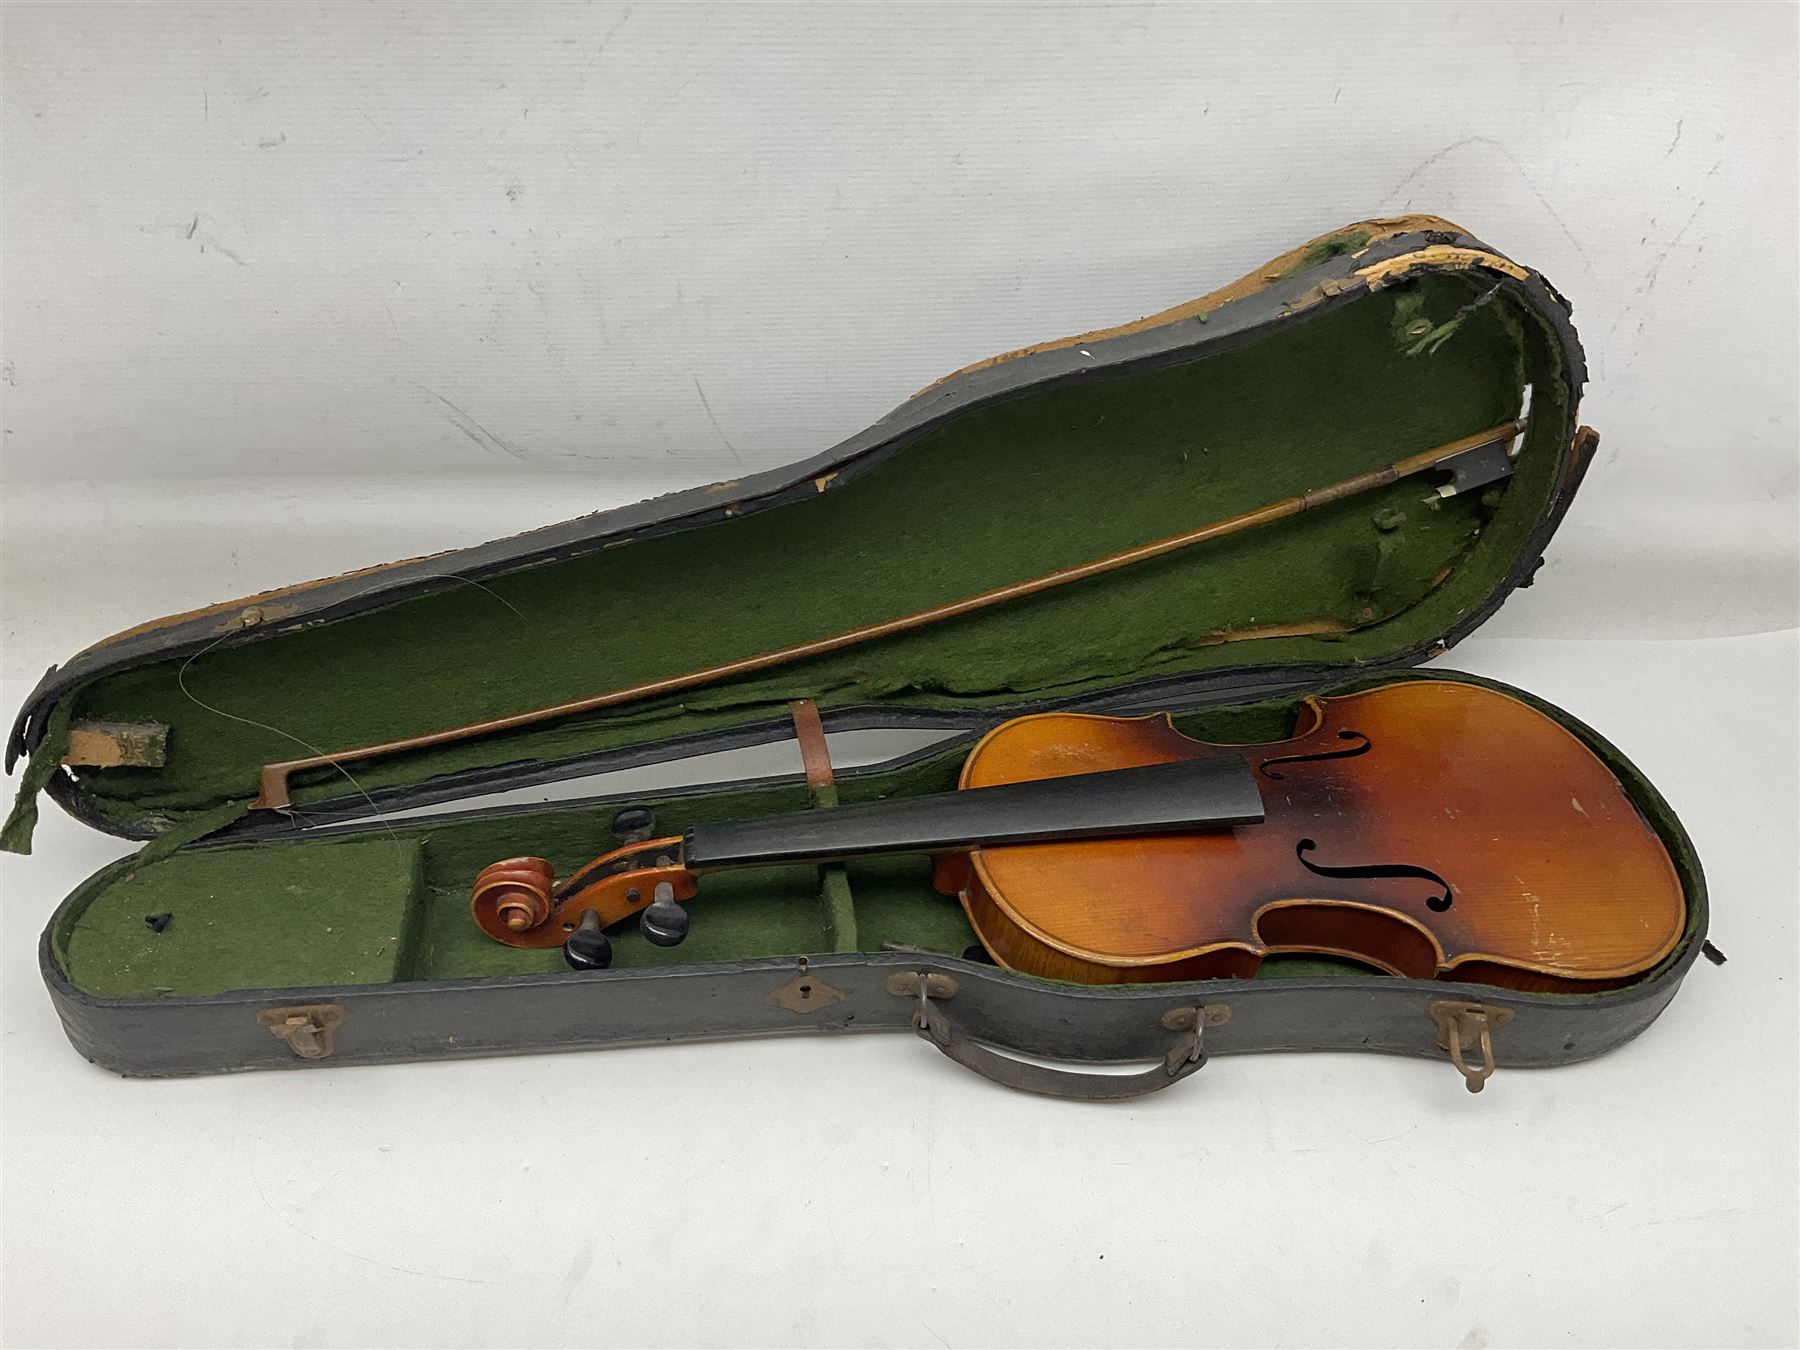 Czechoslovakian violin c1920 with 36cm two-piece maple back and ribs and spruce top - Image 24 of 34